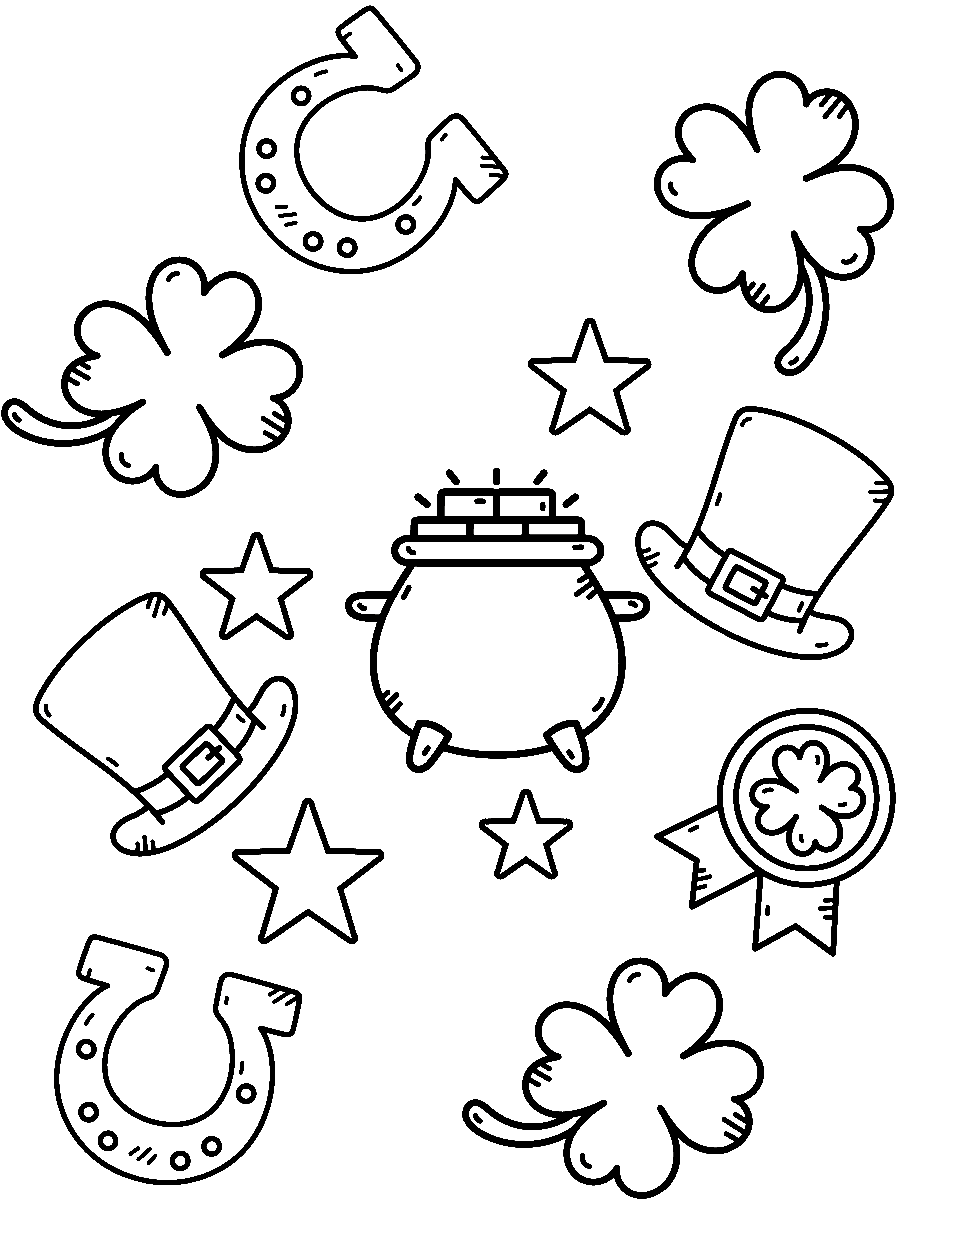 St patricks day coloring pages free printables